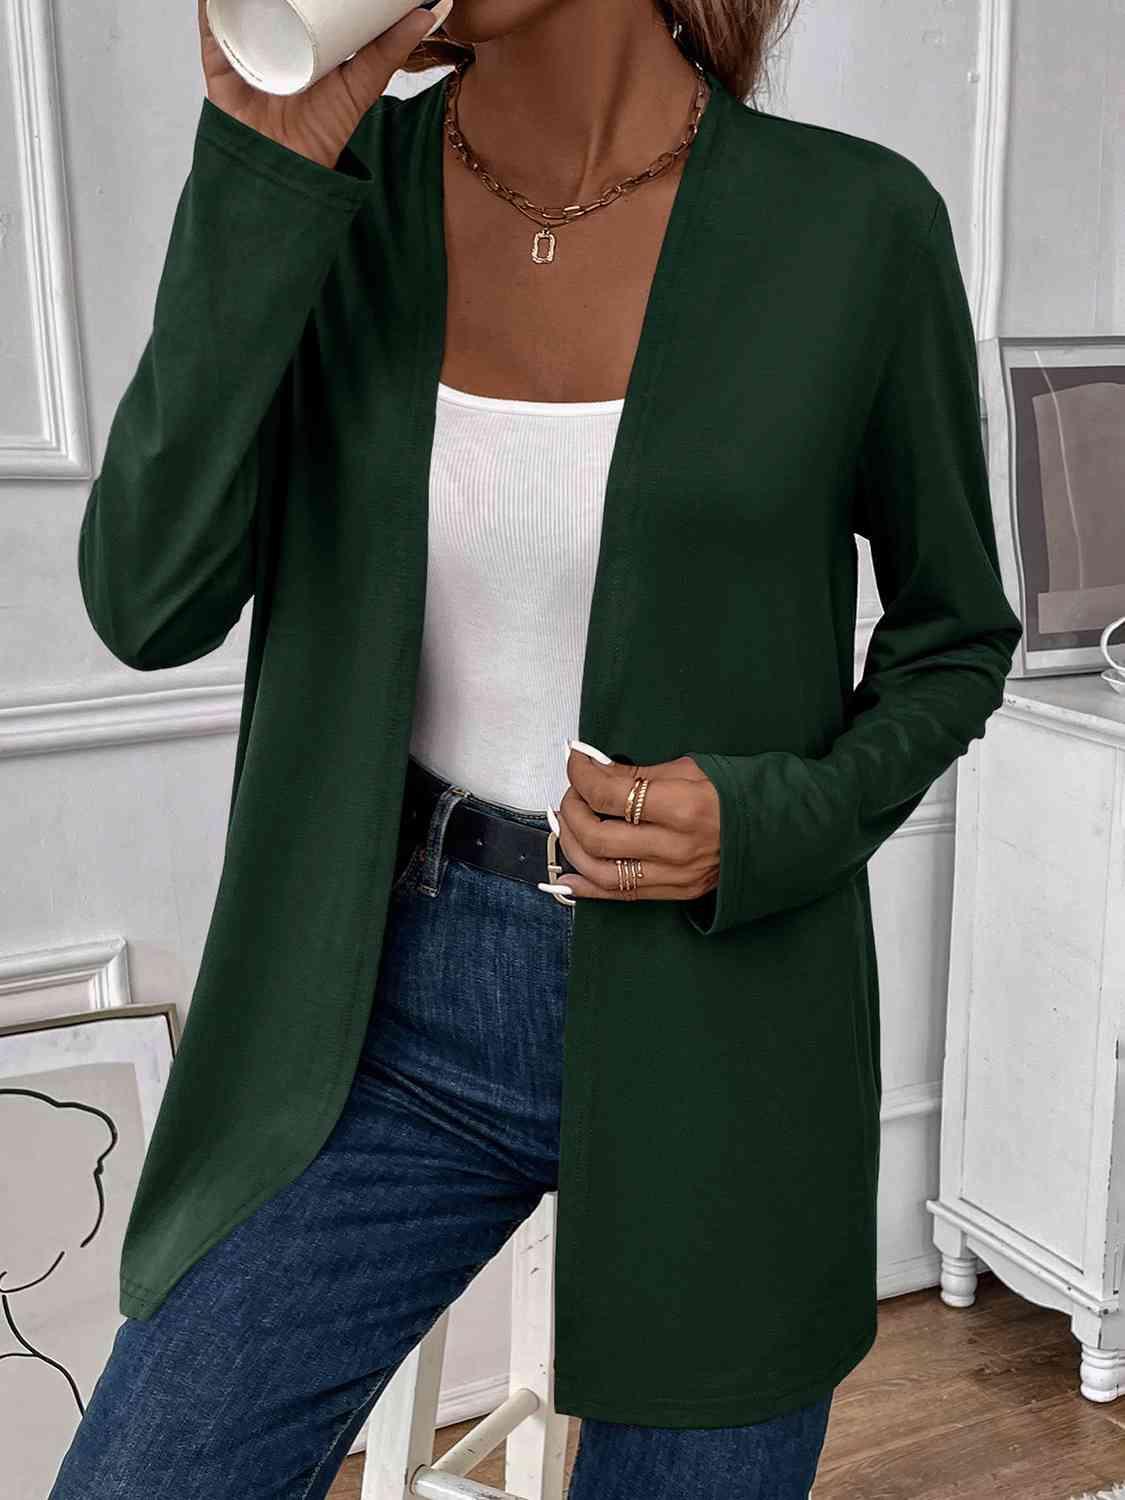 a woman in a green cardigan drinking from a cup